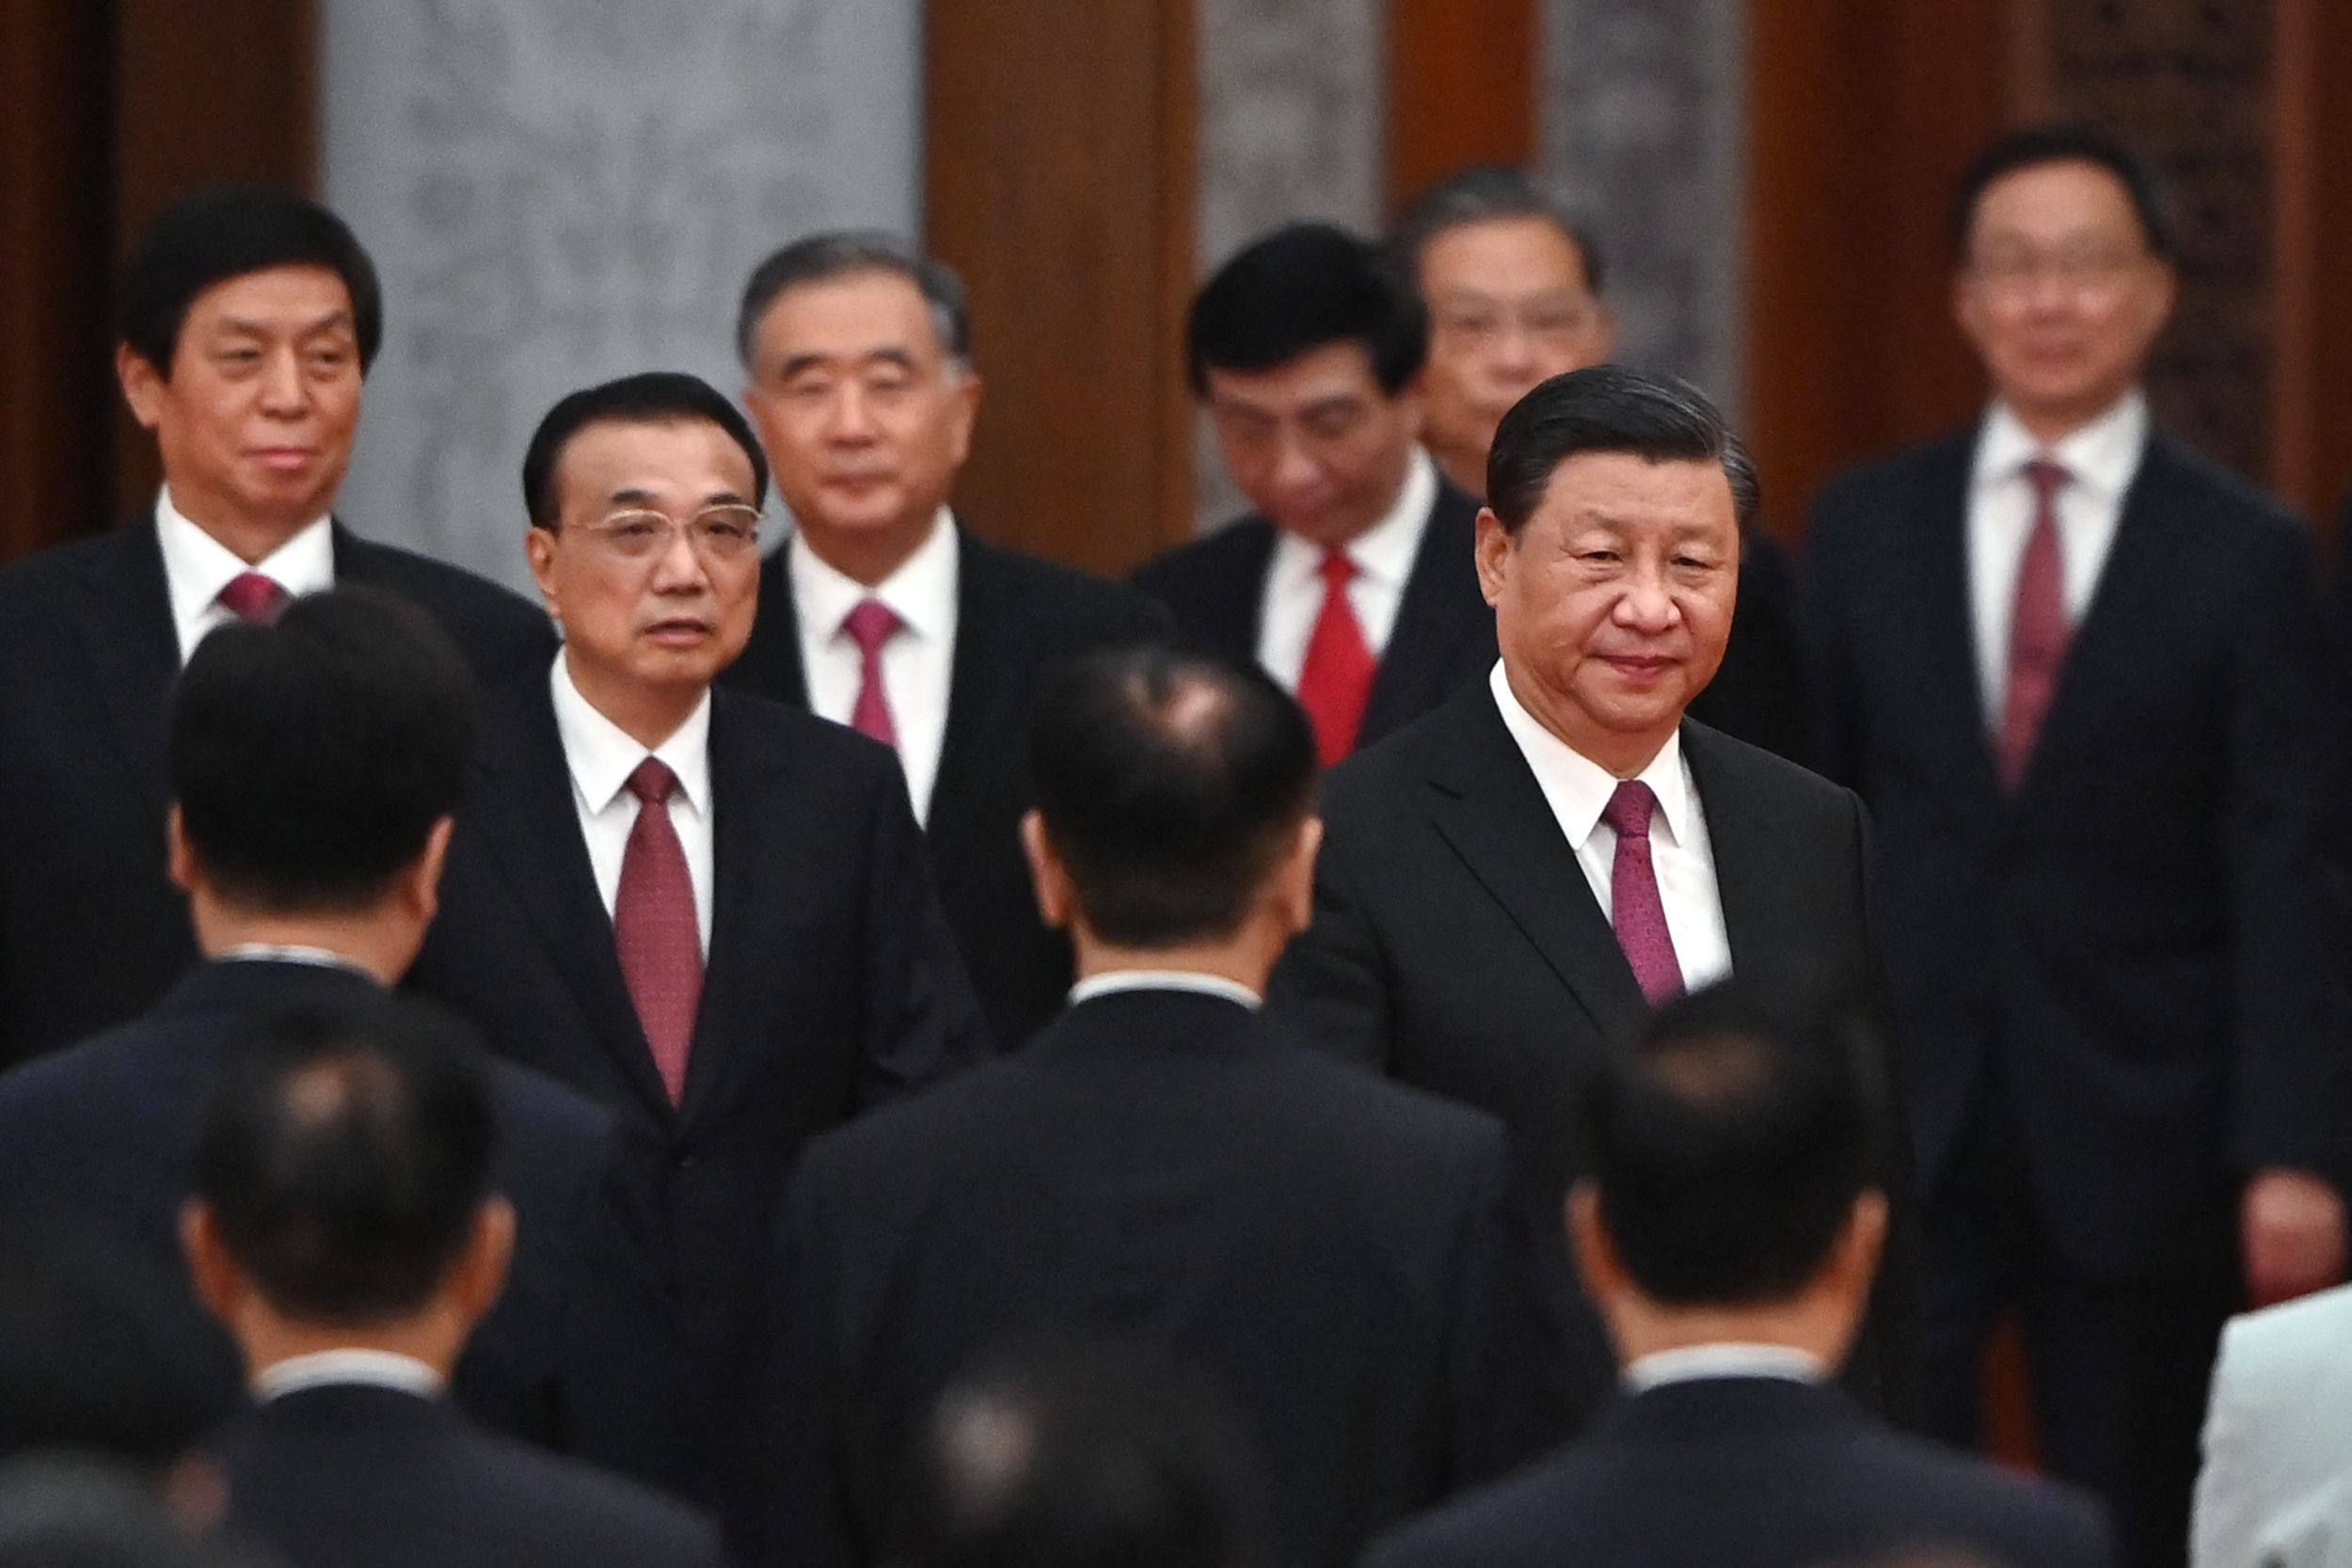 President Xi Jinping said China must use legal means for its battles on the international scene, according to the edited version of a speech he gave to the Politburo in December. Photo: AFP